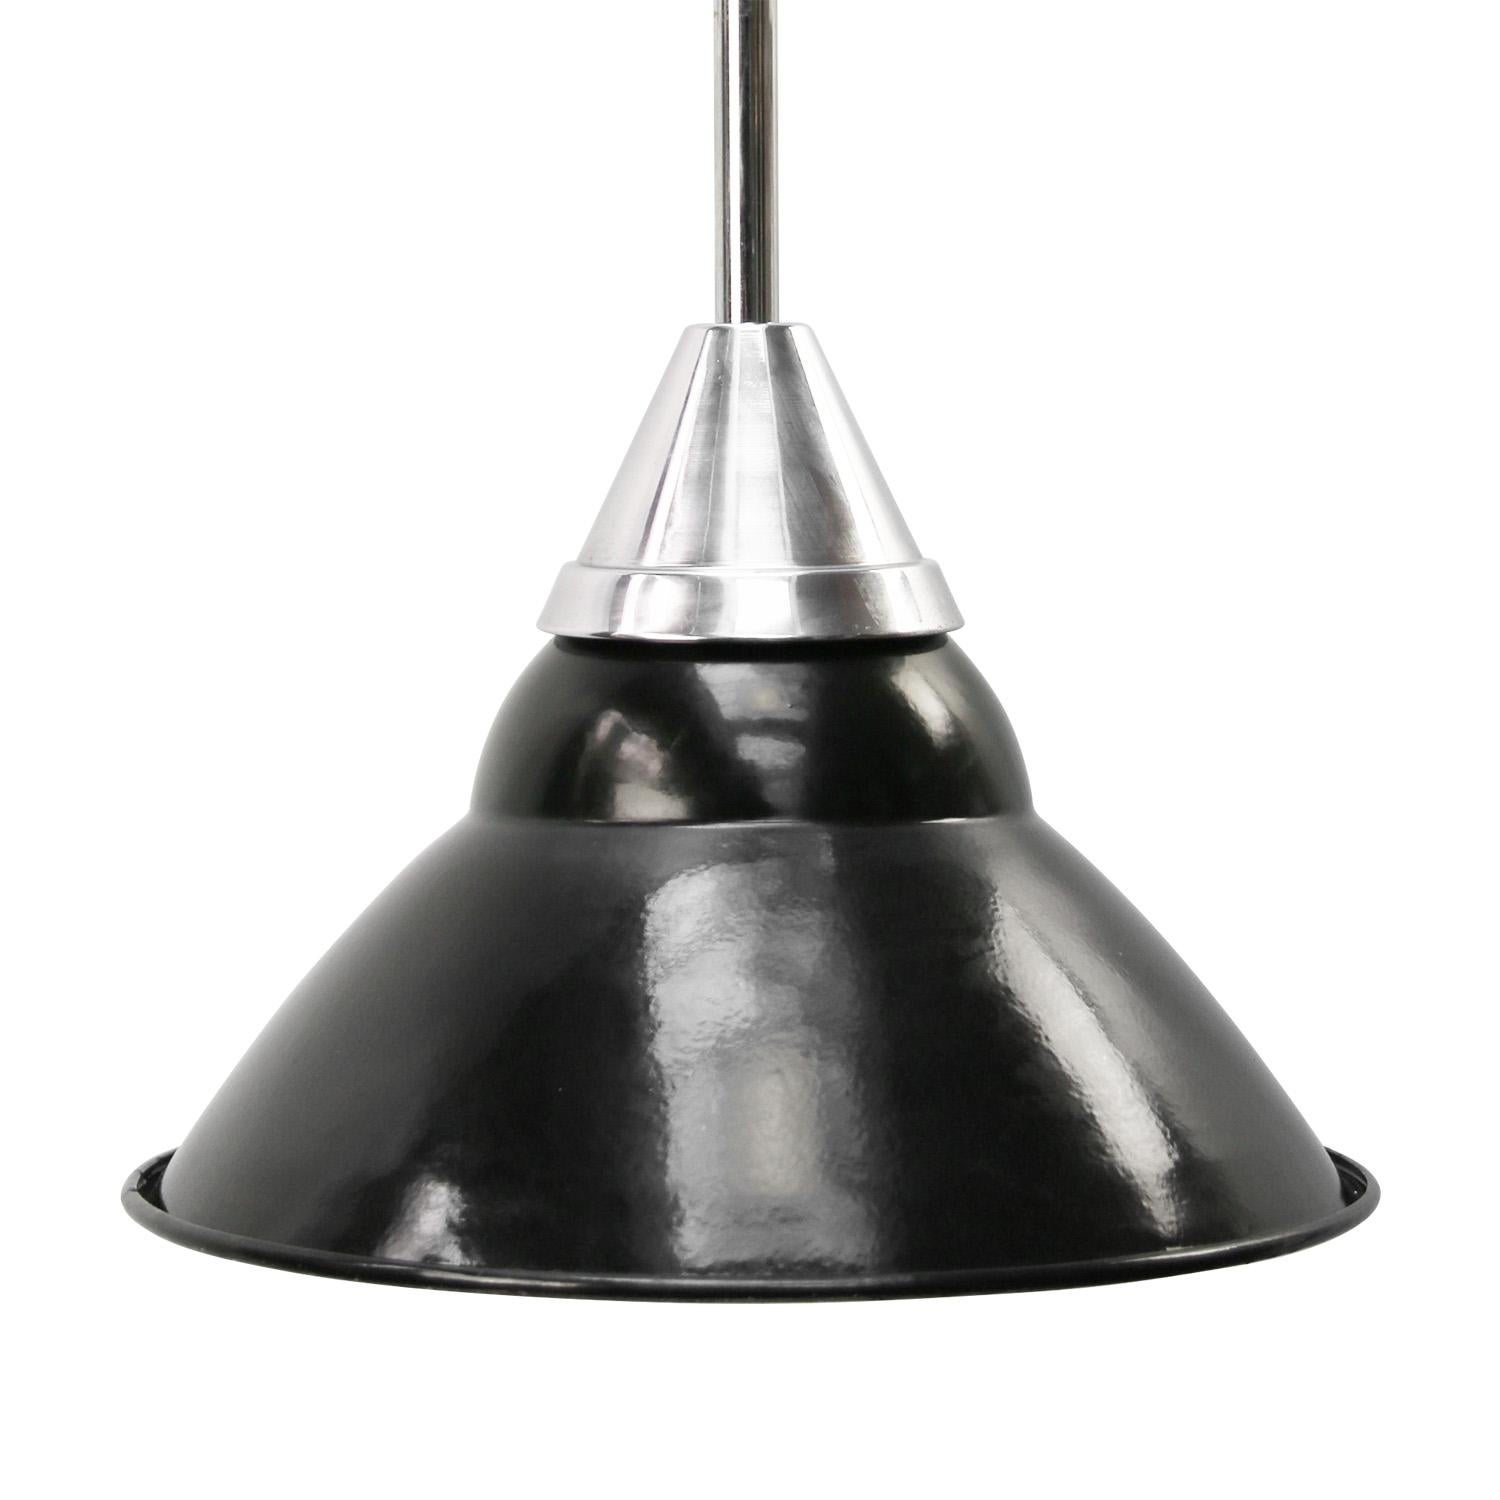 French black Industrial pendant lamp by GAL, France
Chrome top, white inside.

Weight: 1.20 kg / 2.6 lb

Priced per individual item. All lamps have been made suitable by international standards for incandescent light bulbs, energy-efficient and